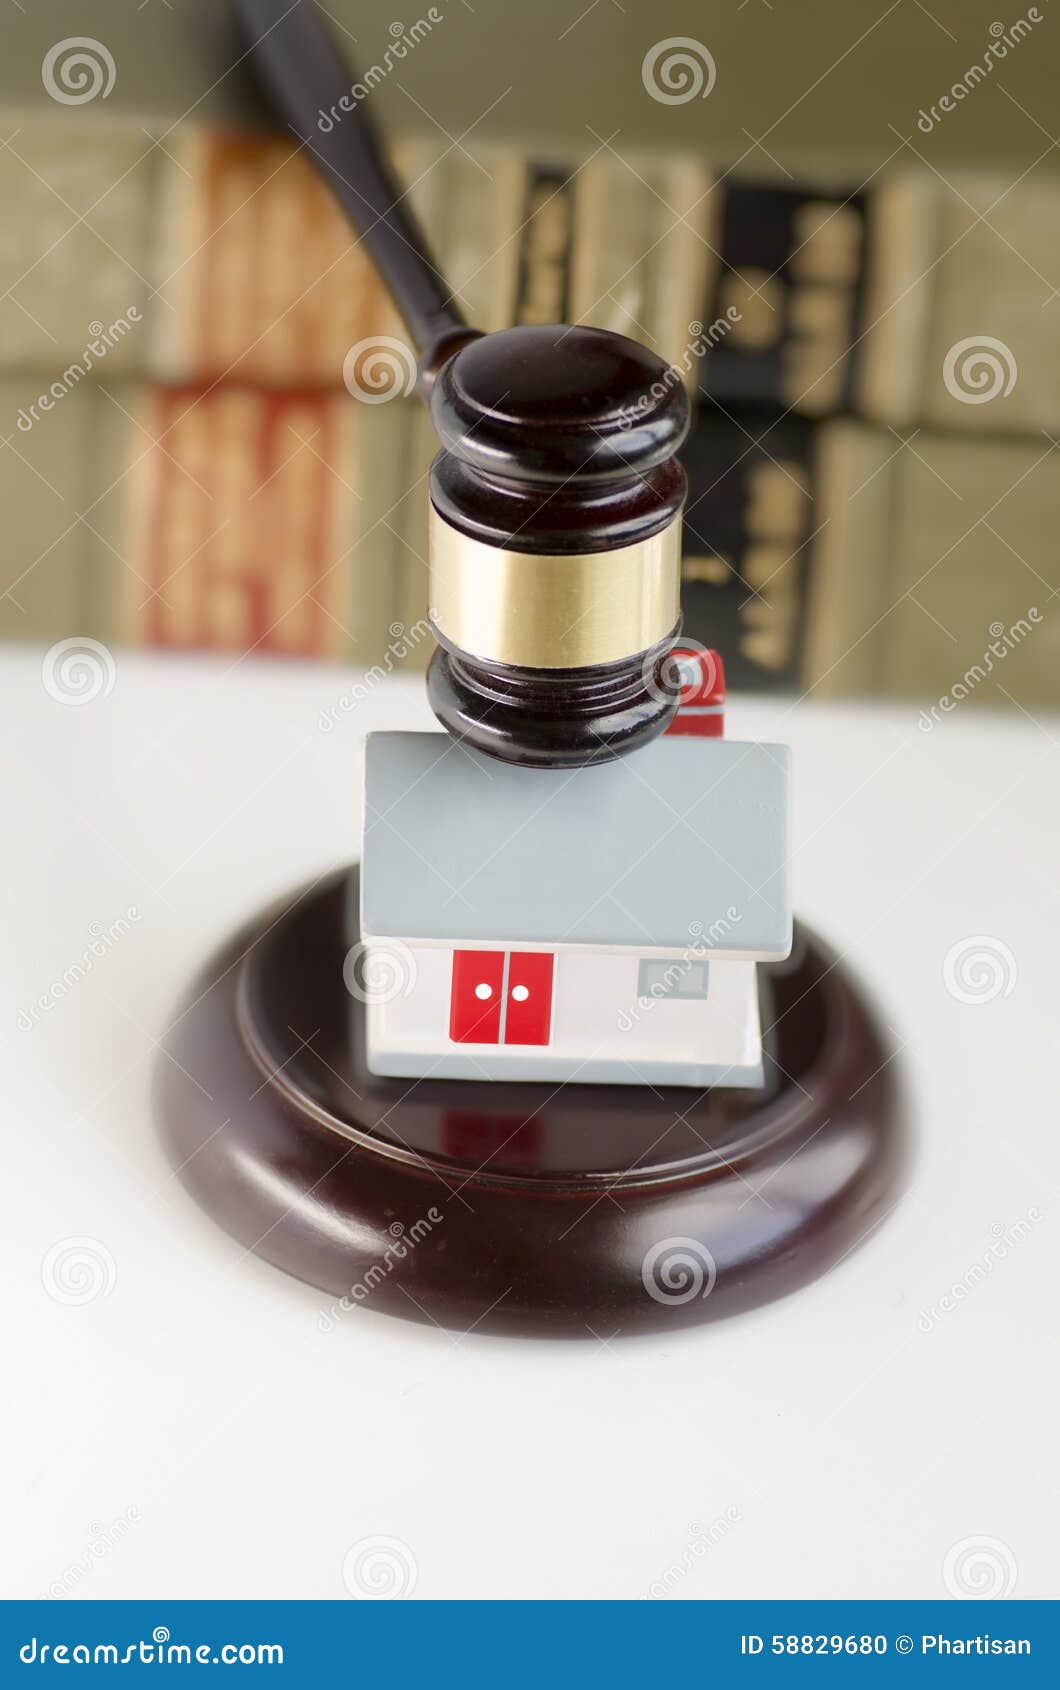 Real Estate Law Contract Concept Image Stock Photo - Image ...